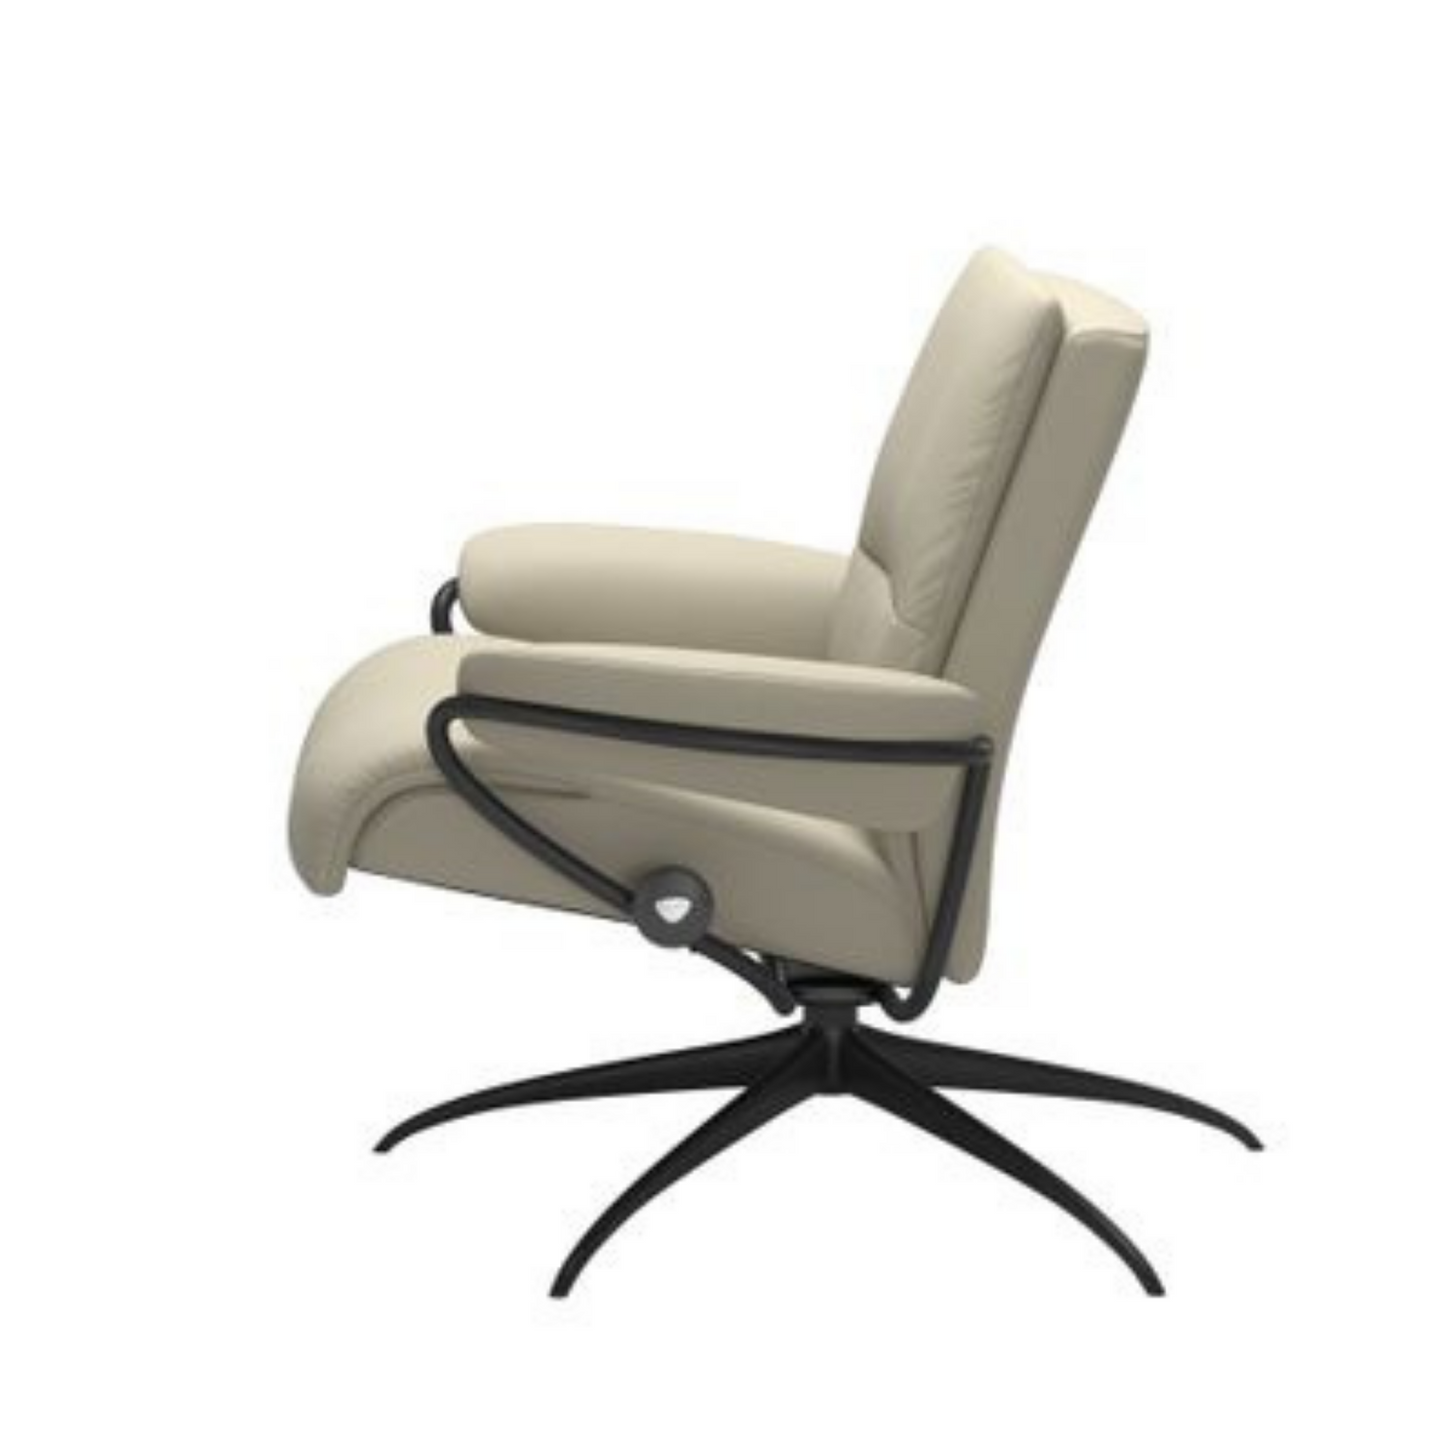 Tokyo Low Back Recliner by Stressless